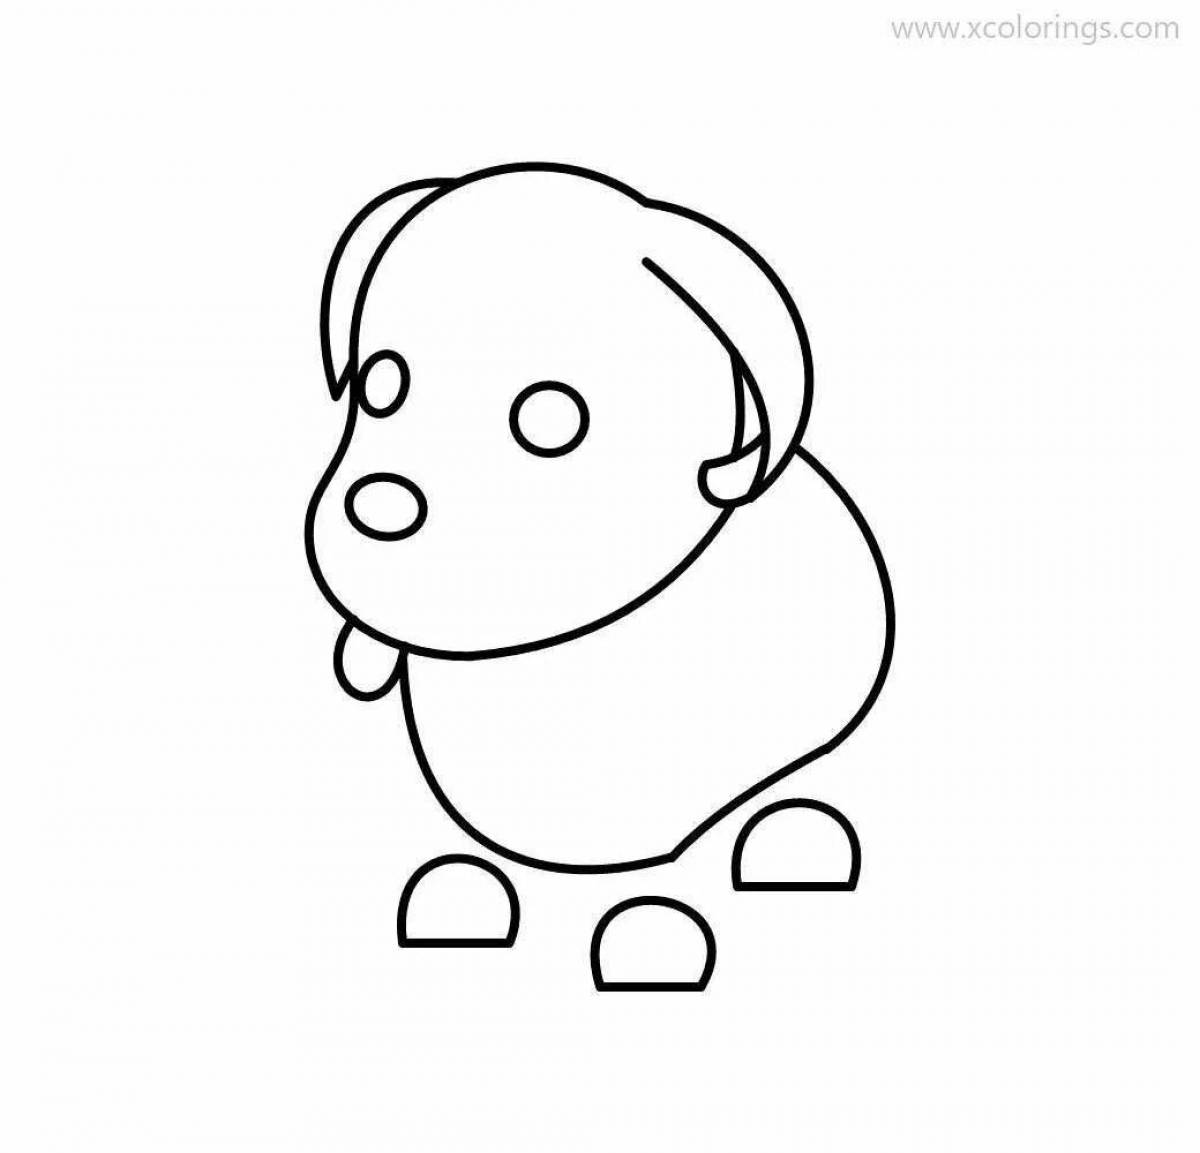 Coloring page affectionate blue puppy